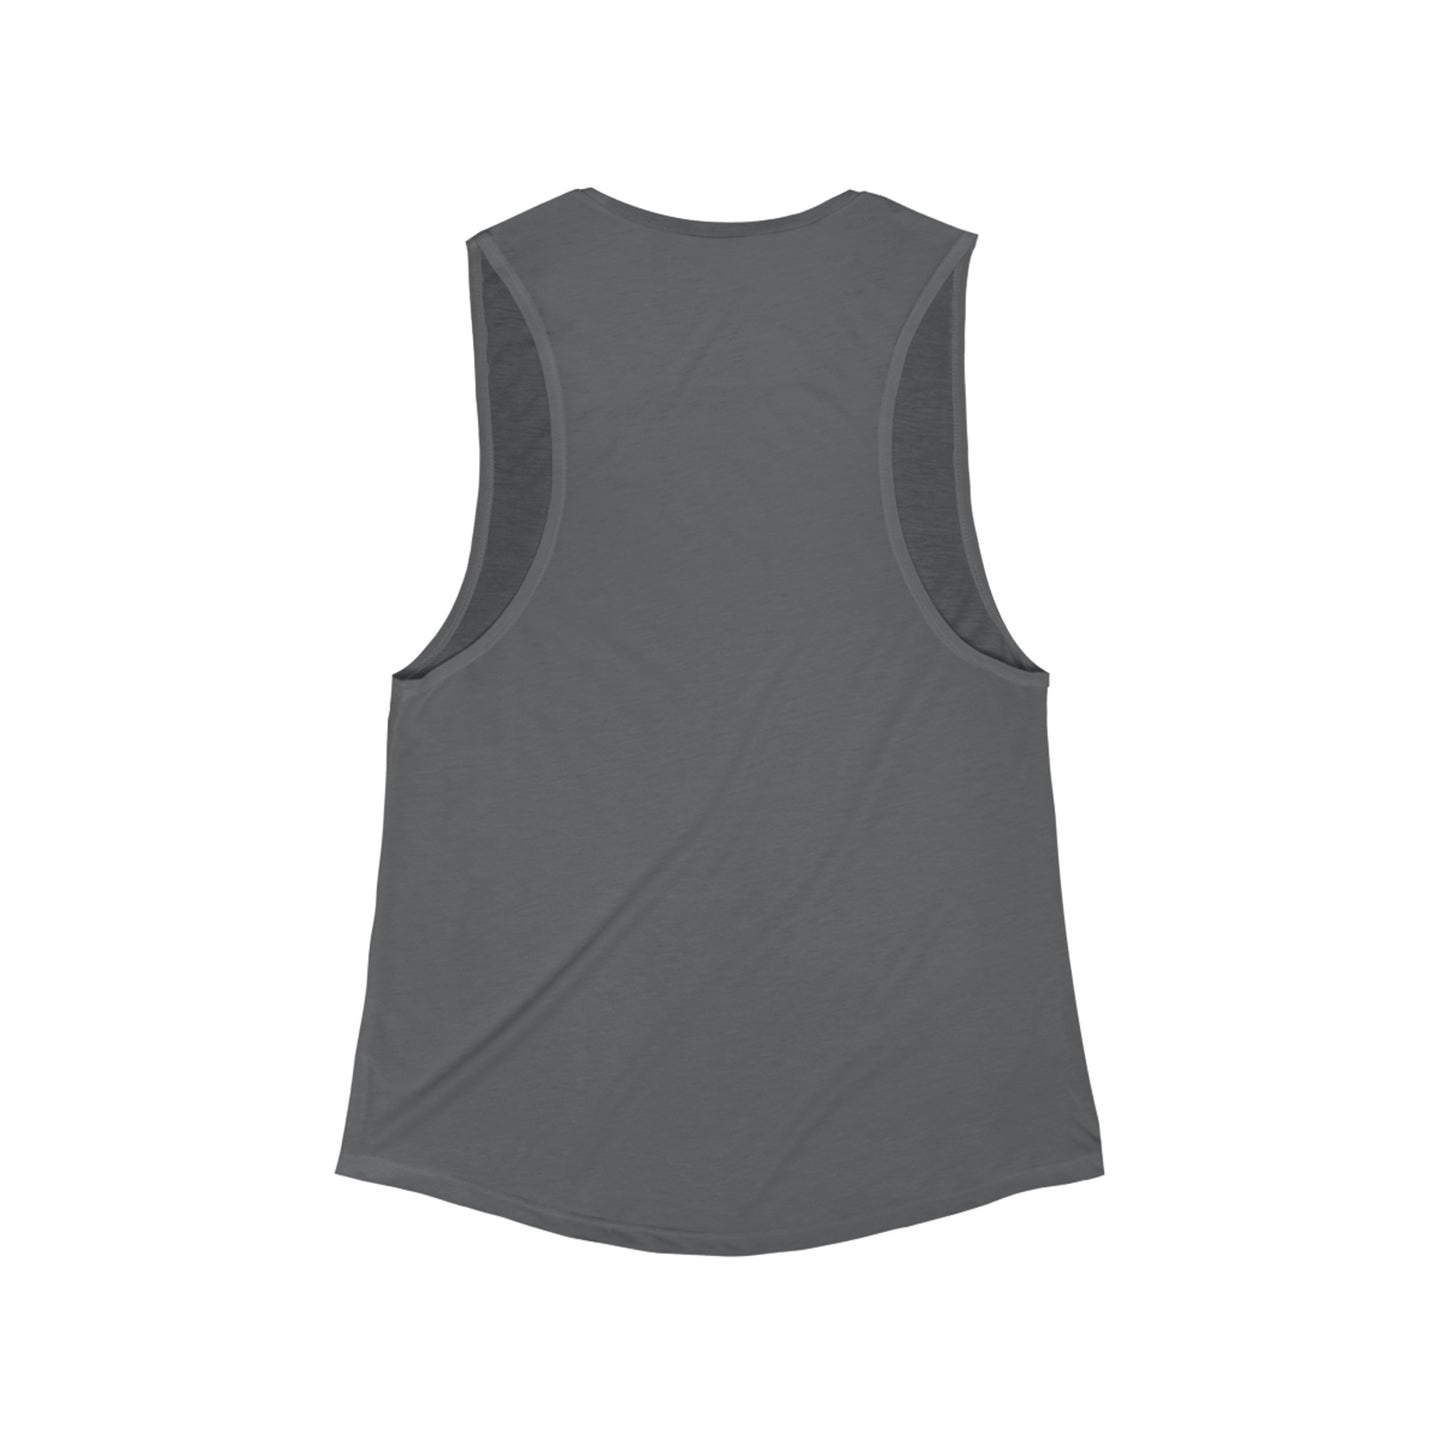 Three Horses Galloping Through Canyon Women's Flowy Scoop Muscle Tank